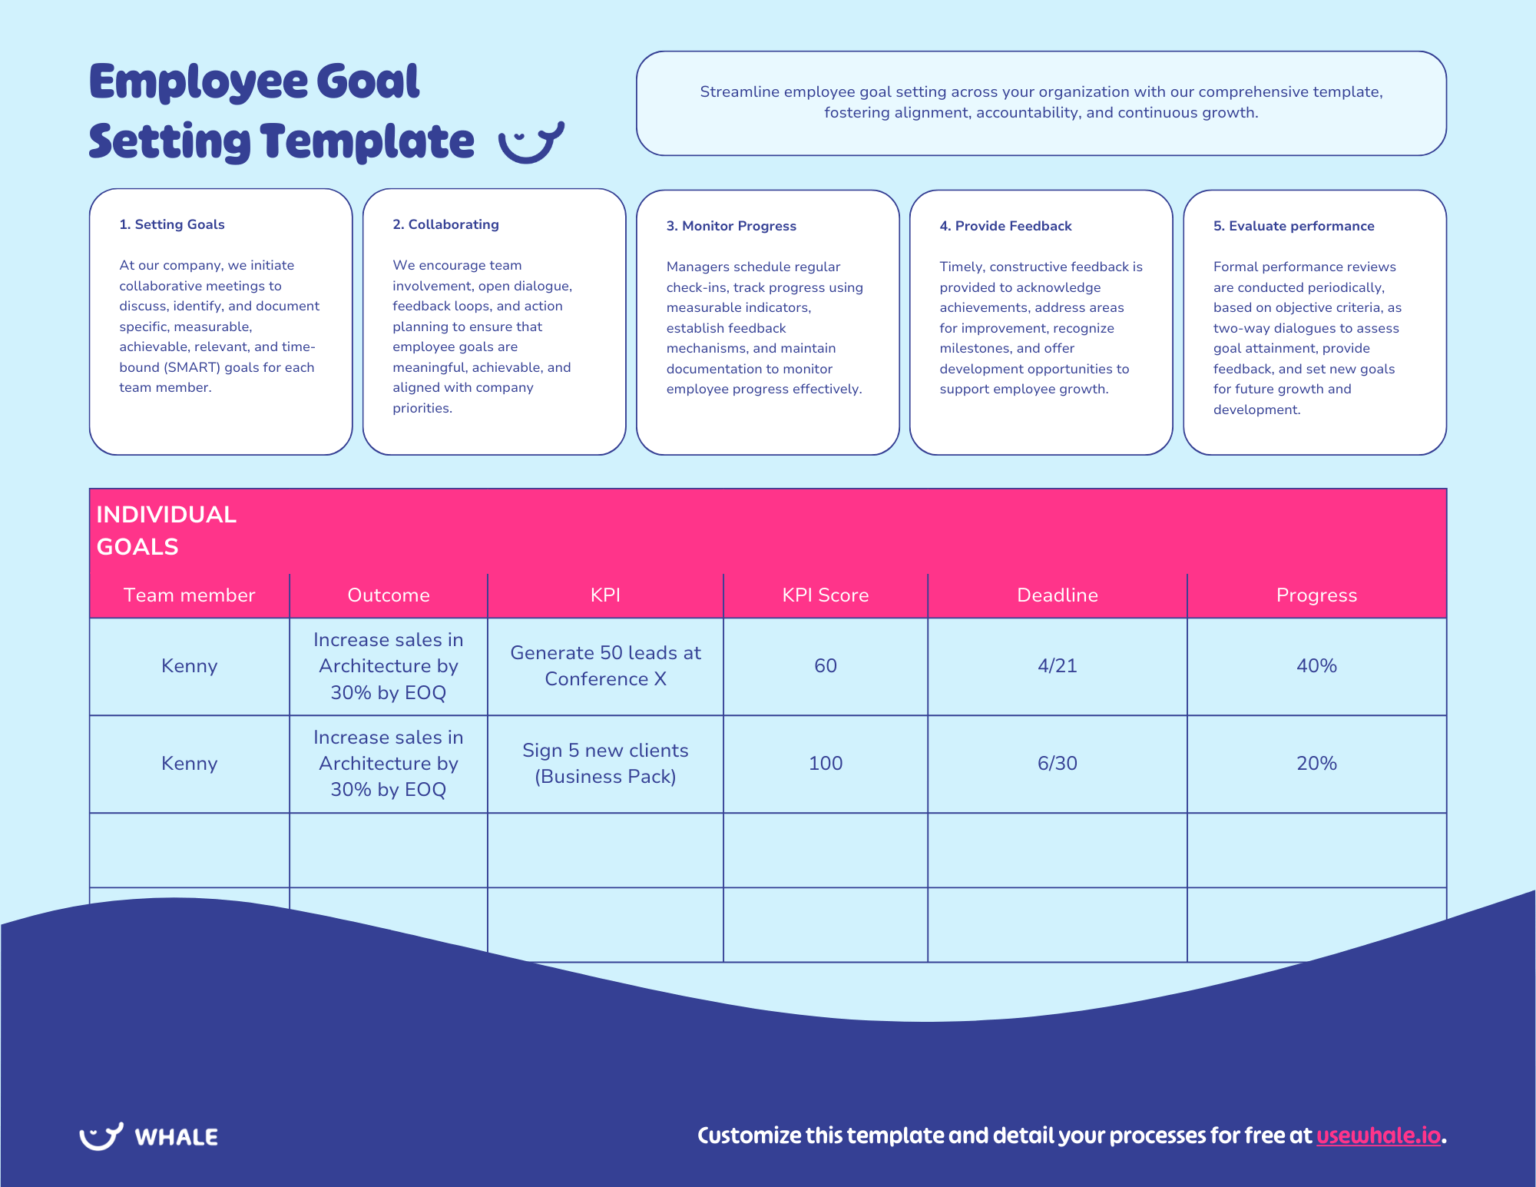 An employee goal setting template with sections for team member details, individual goals, and progress displayed in neatly arranged tables, from Whale